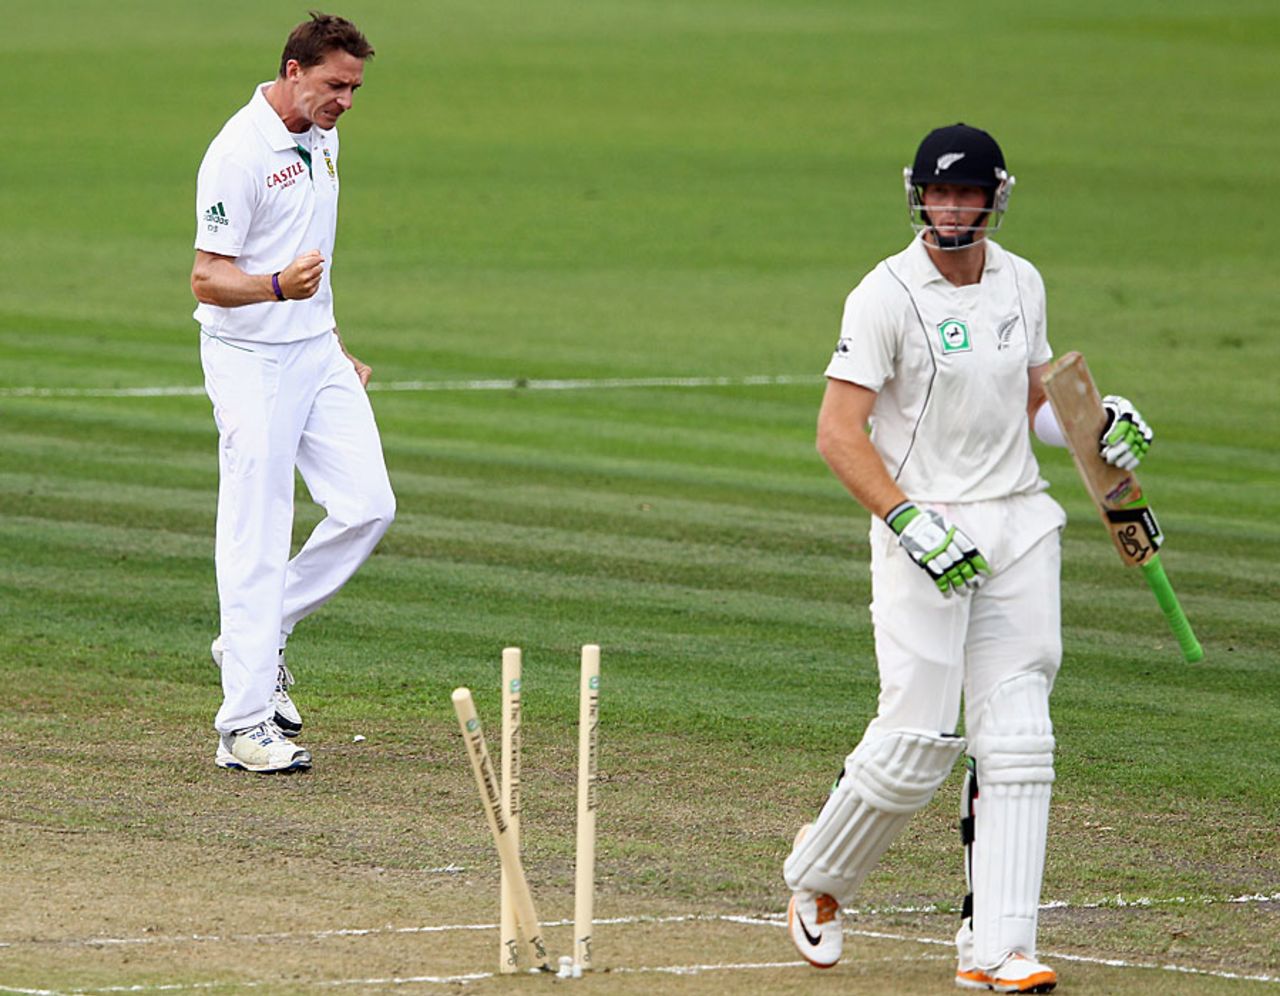 Dale Steyn is pumped up after bowling Martin Guptill, New Zealand v South Africa, 2nd Test, Hamilton, 1st day, March 15, 2012